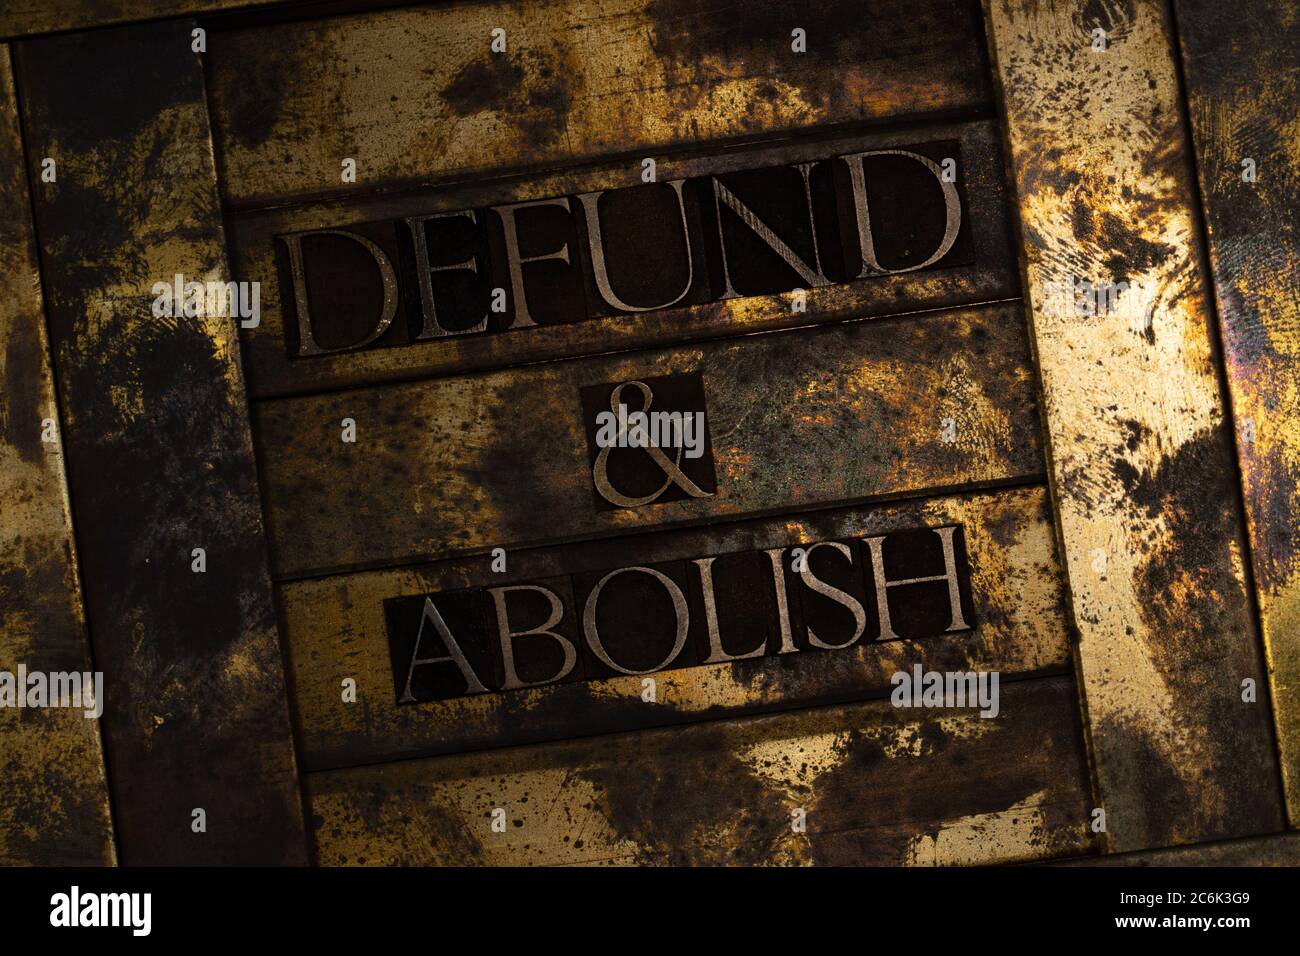 Defund and Abolish text formed with real authentic typeset letters on vintage textured silver grunge copper and gold background Stock Photo